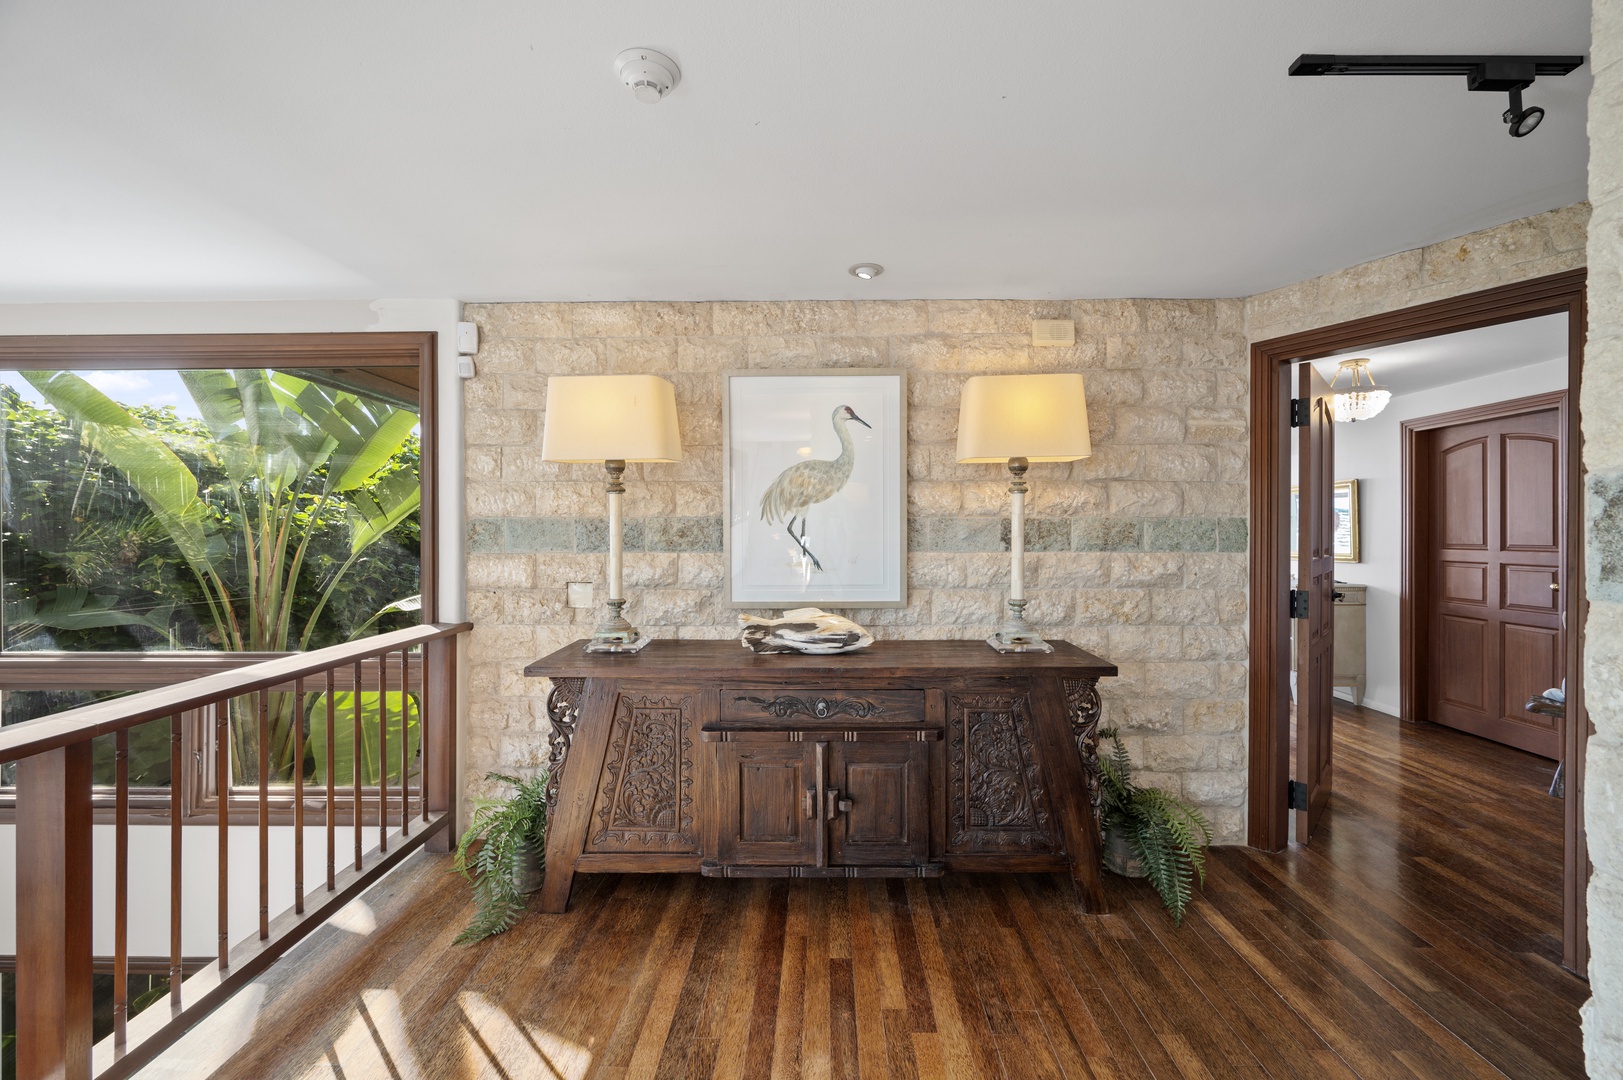 Honolulu Vacation Rentals, Kaiko'o Villa** - Just one of the stunning pieces of furniture you'll be surrounded by